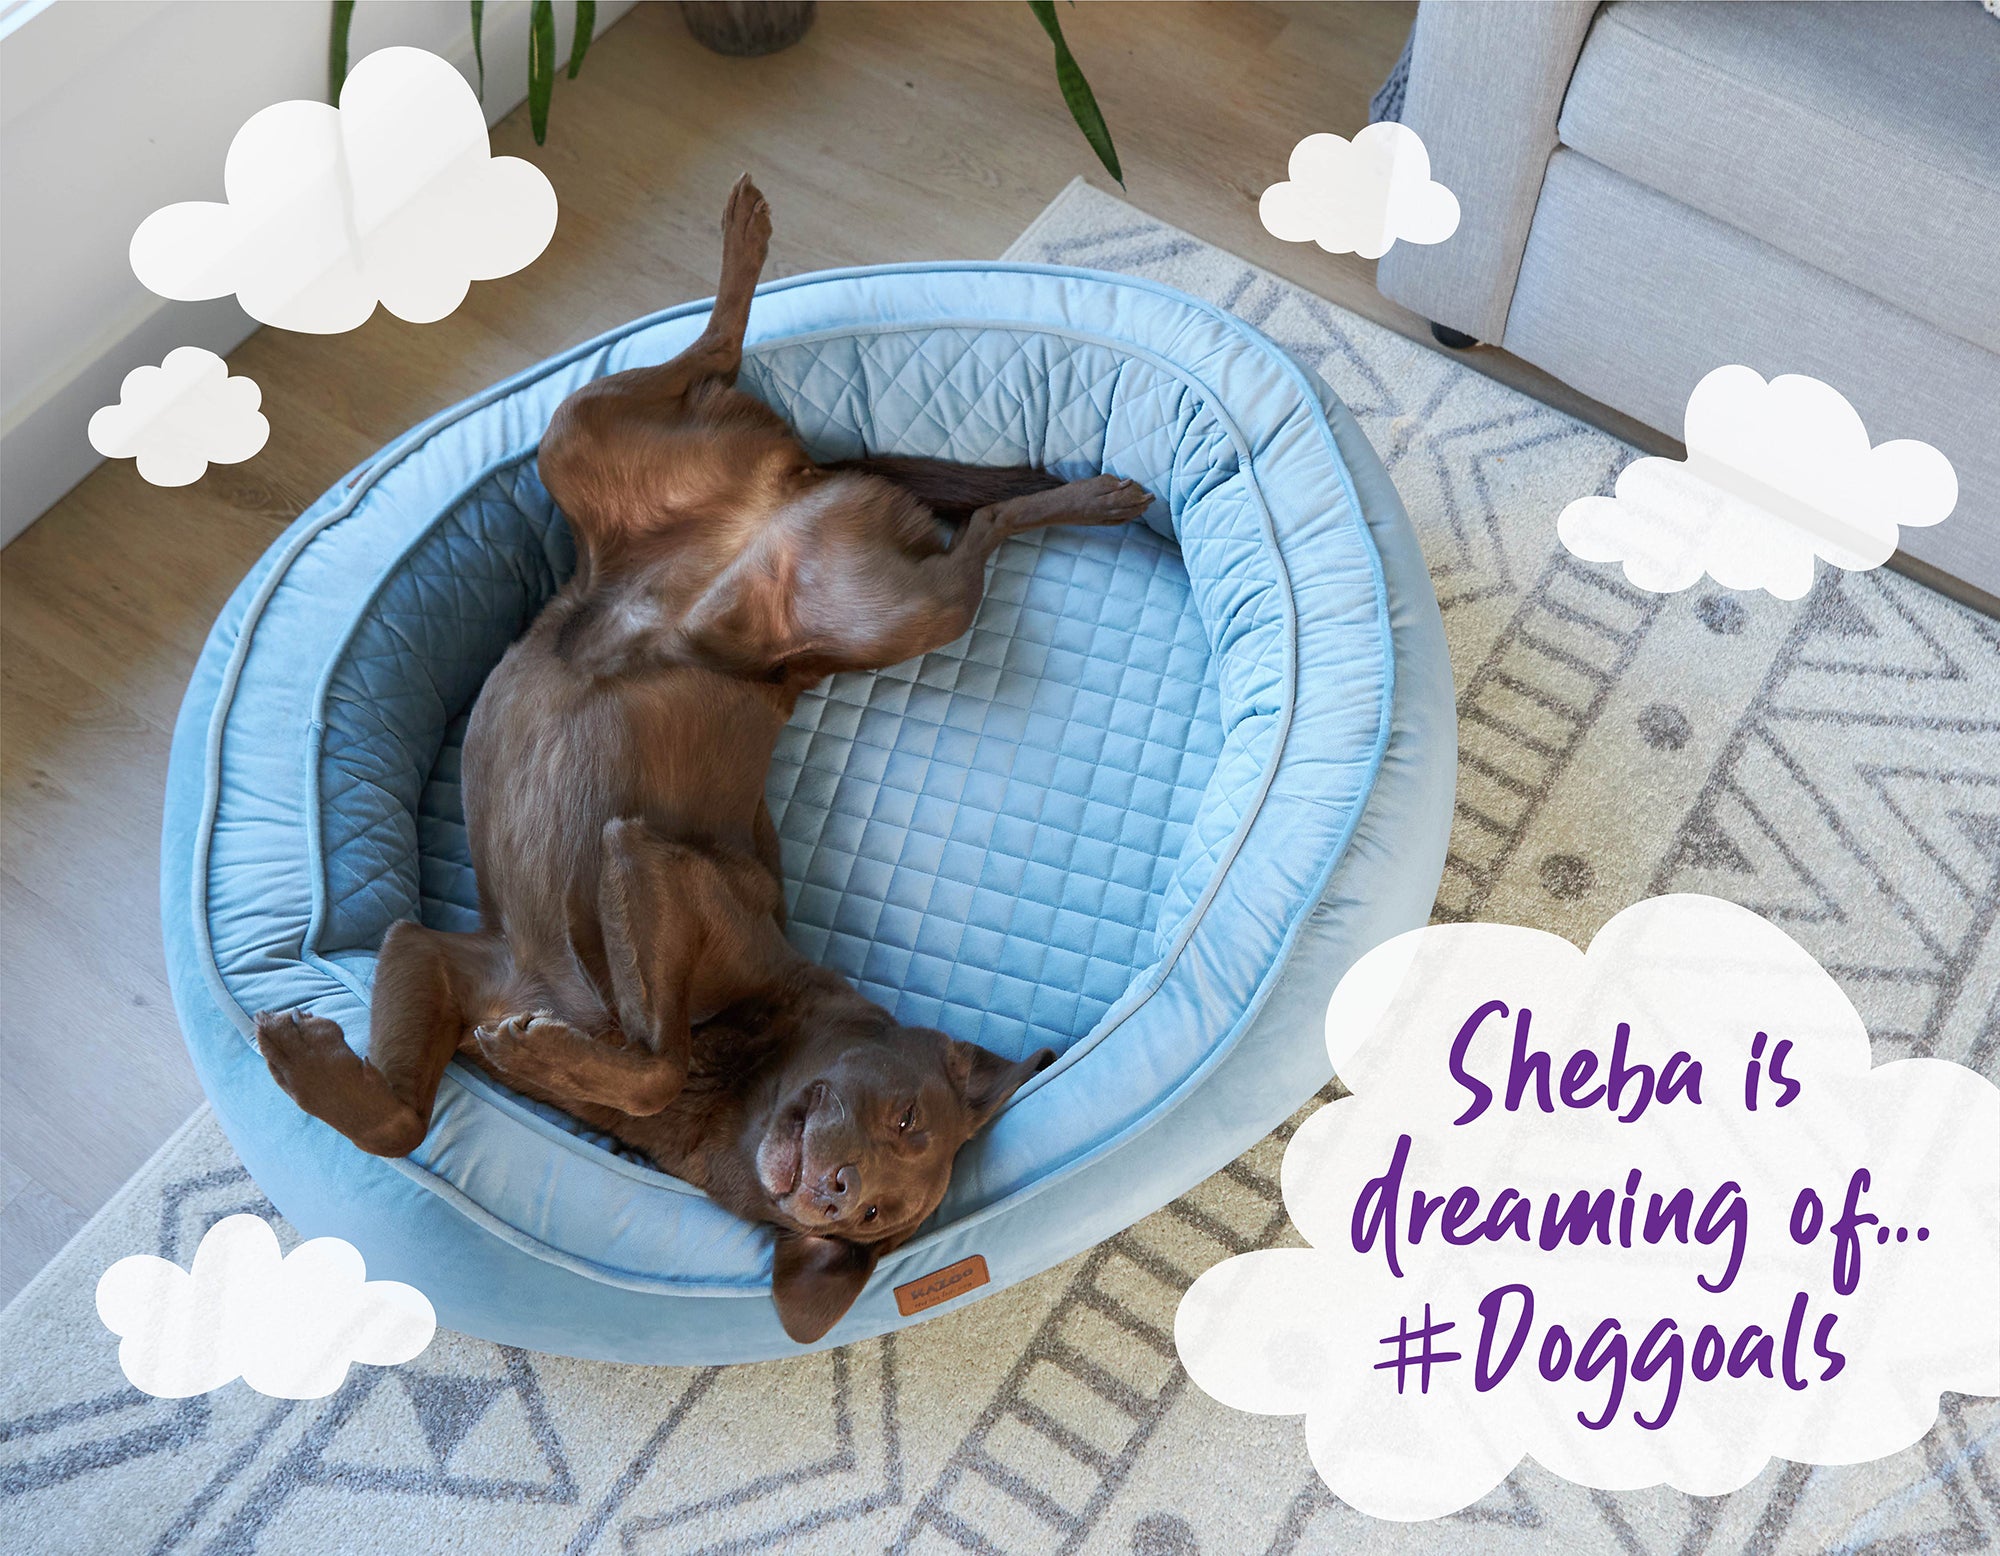 Chocolate labrador sprawled out lying on her back, 'Sheba is a dreaming of #doggoals'